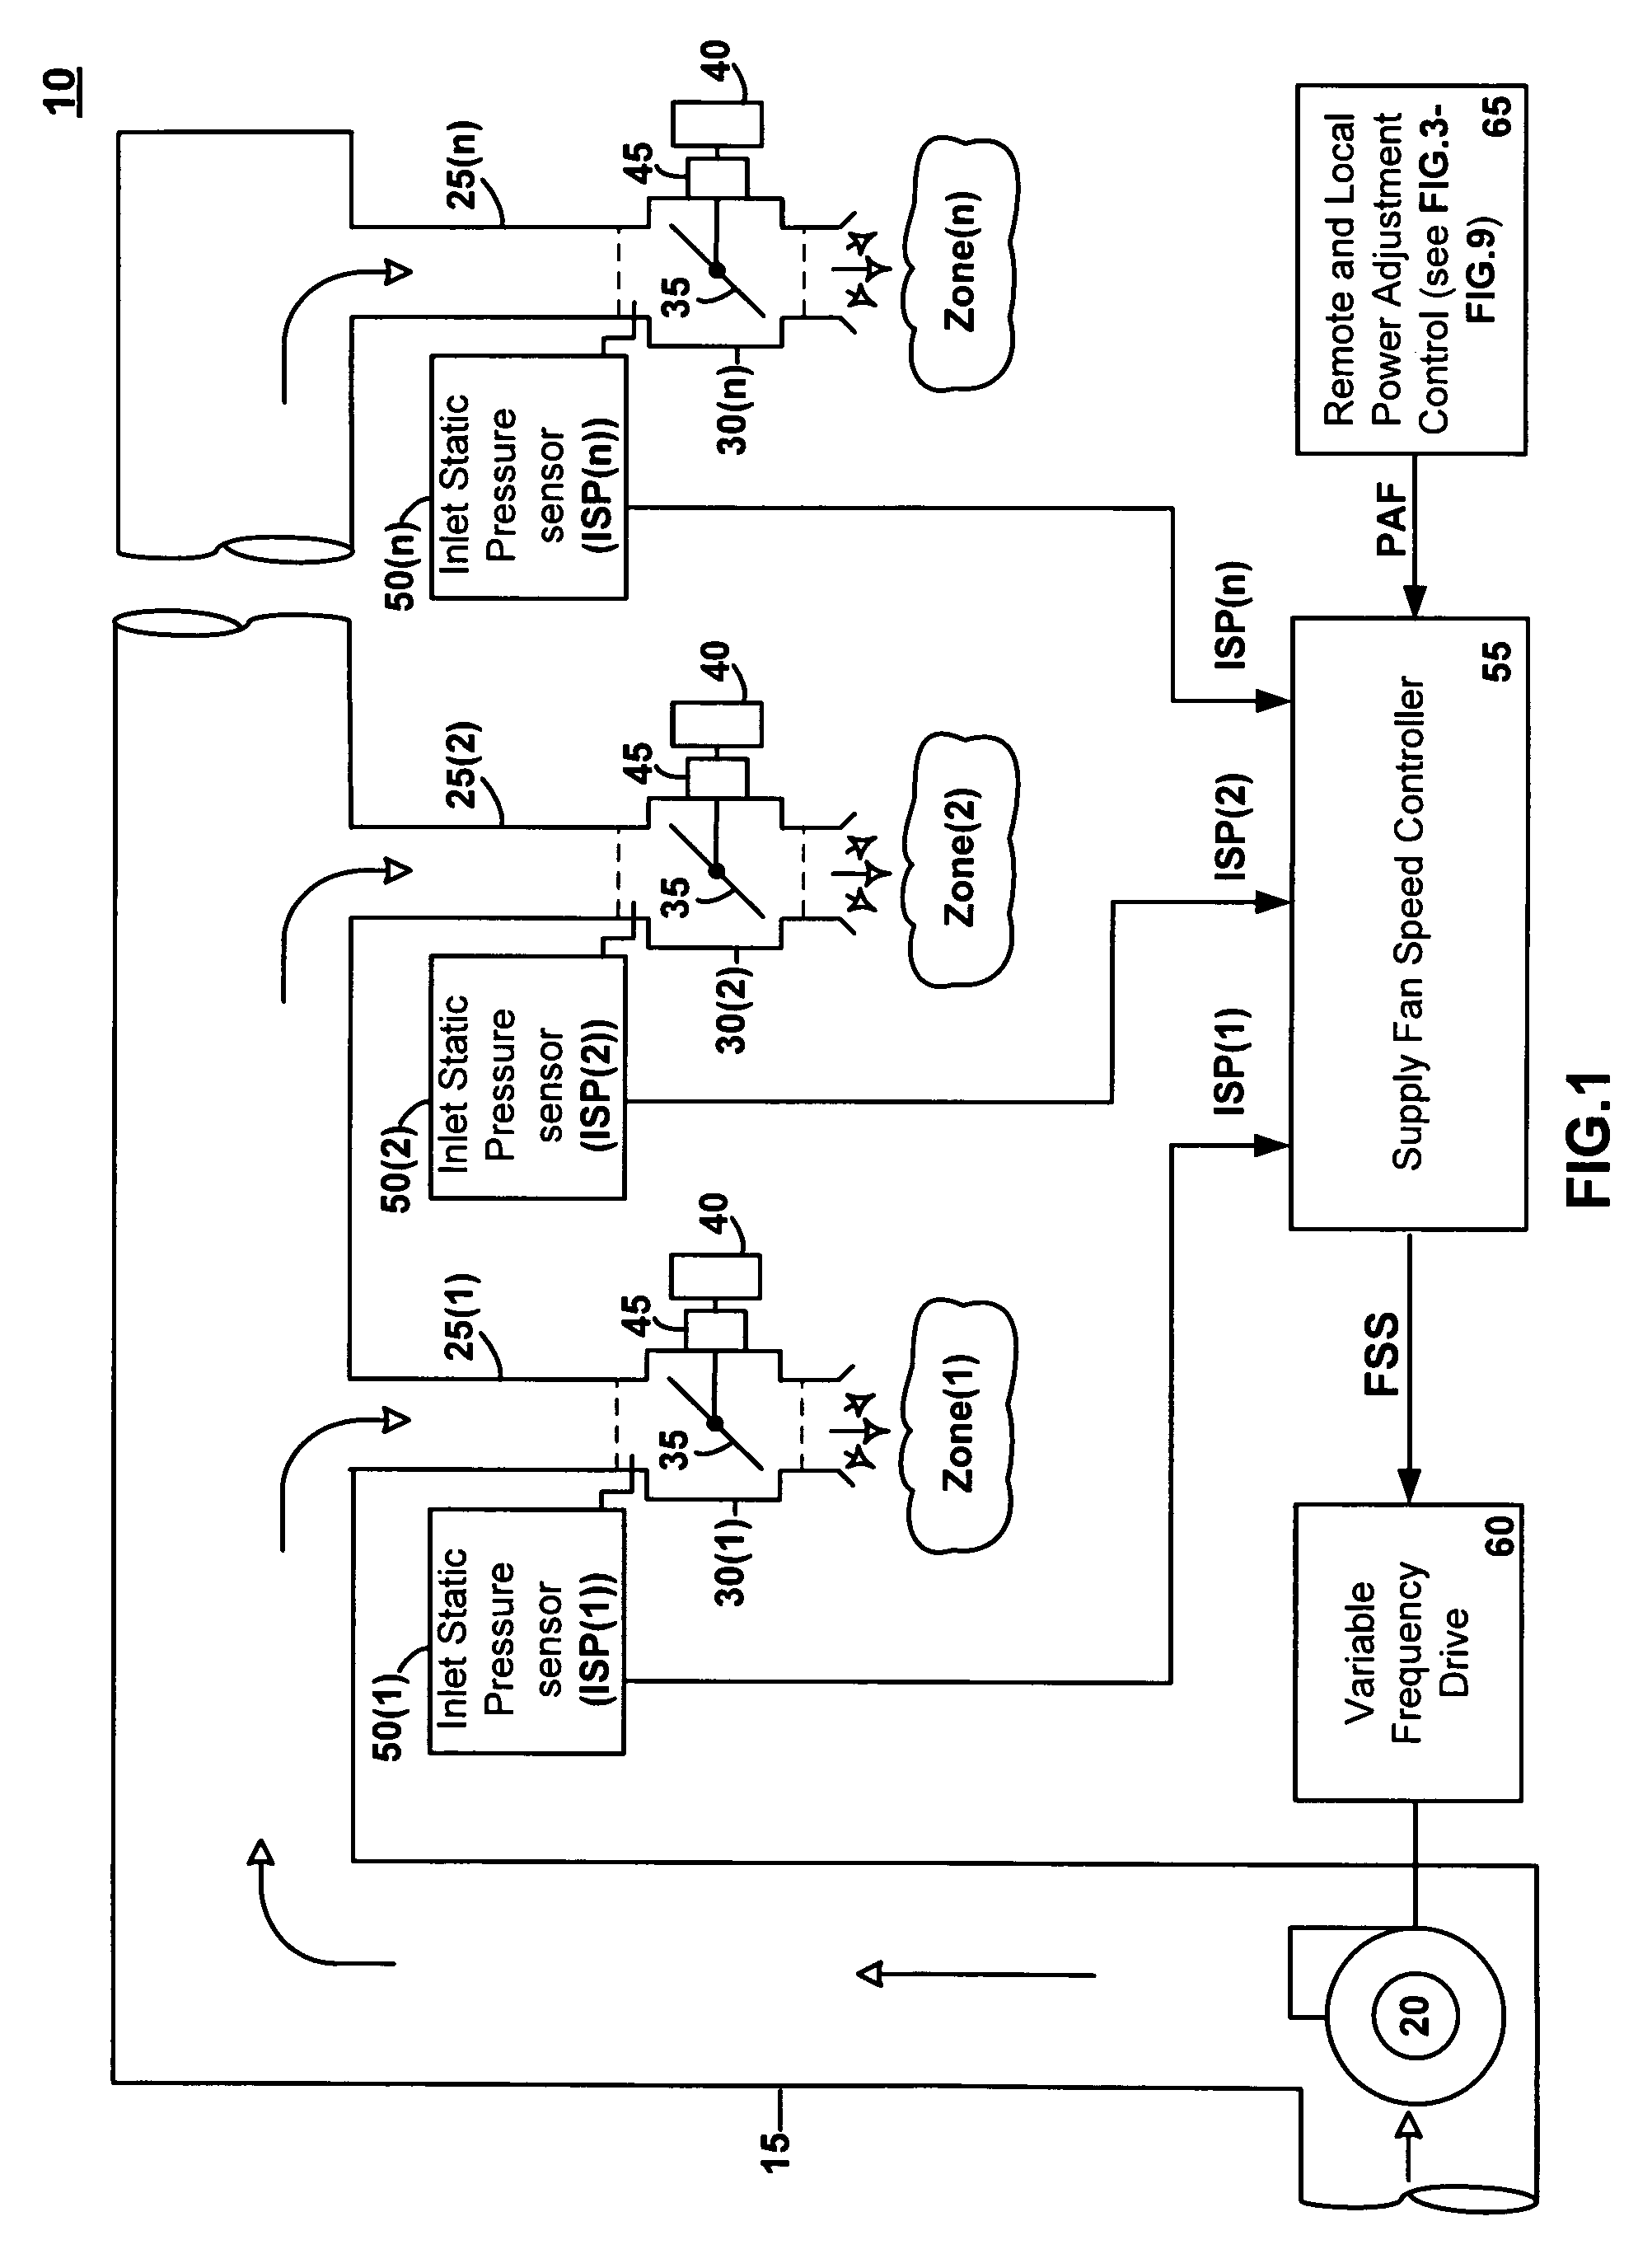 System and method for controlling supply fan speed within a variable air volume system